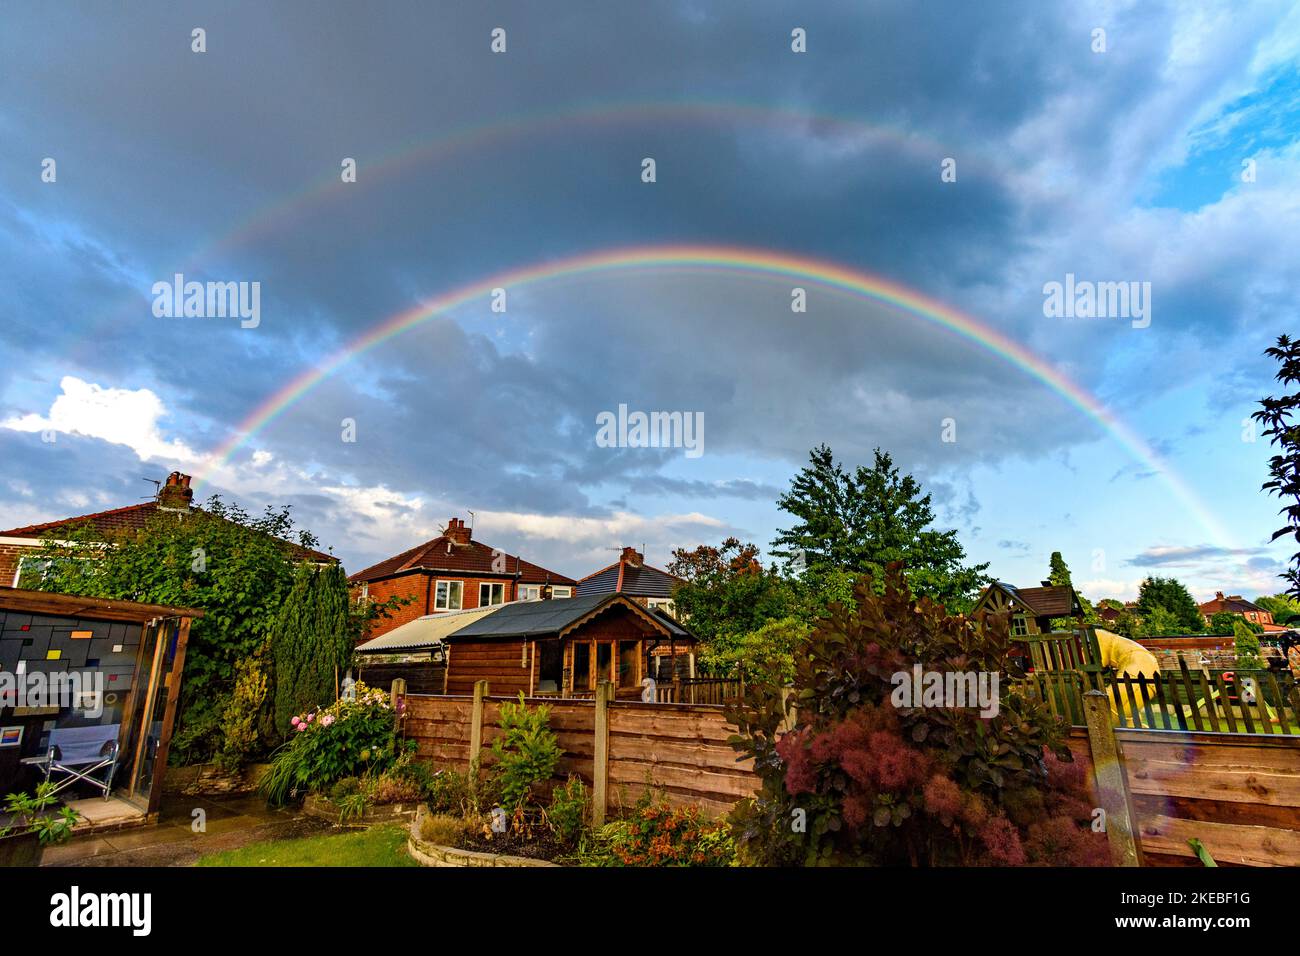 Double rainbow over houses on a suburban housing estate, Tameside, Greater Manchester, England, UK Stock Photo